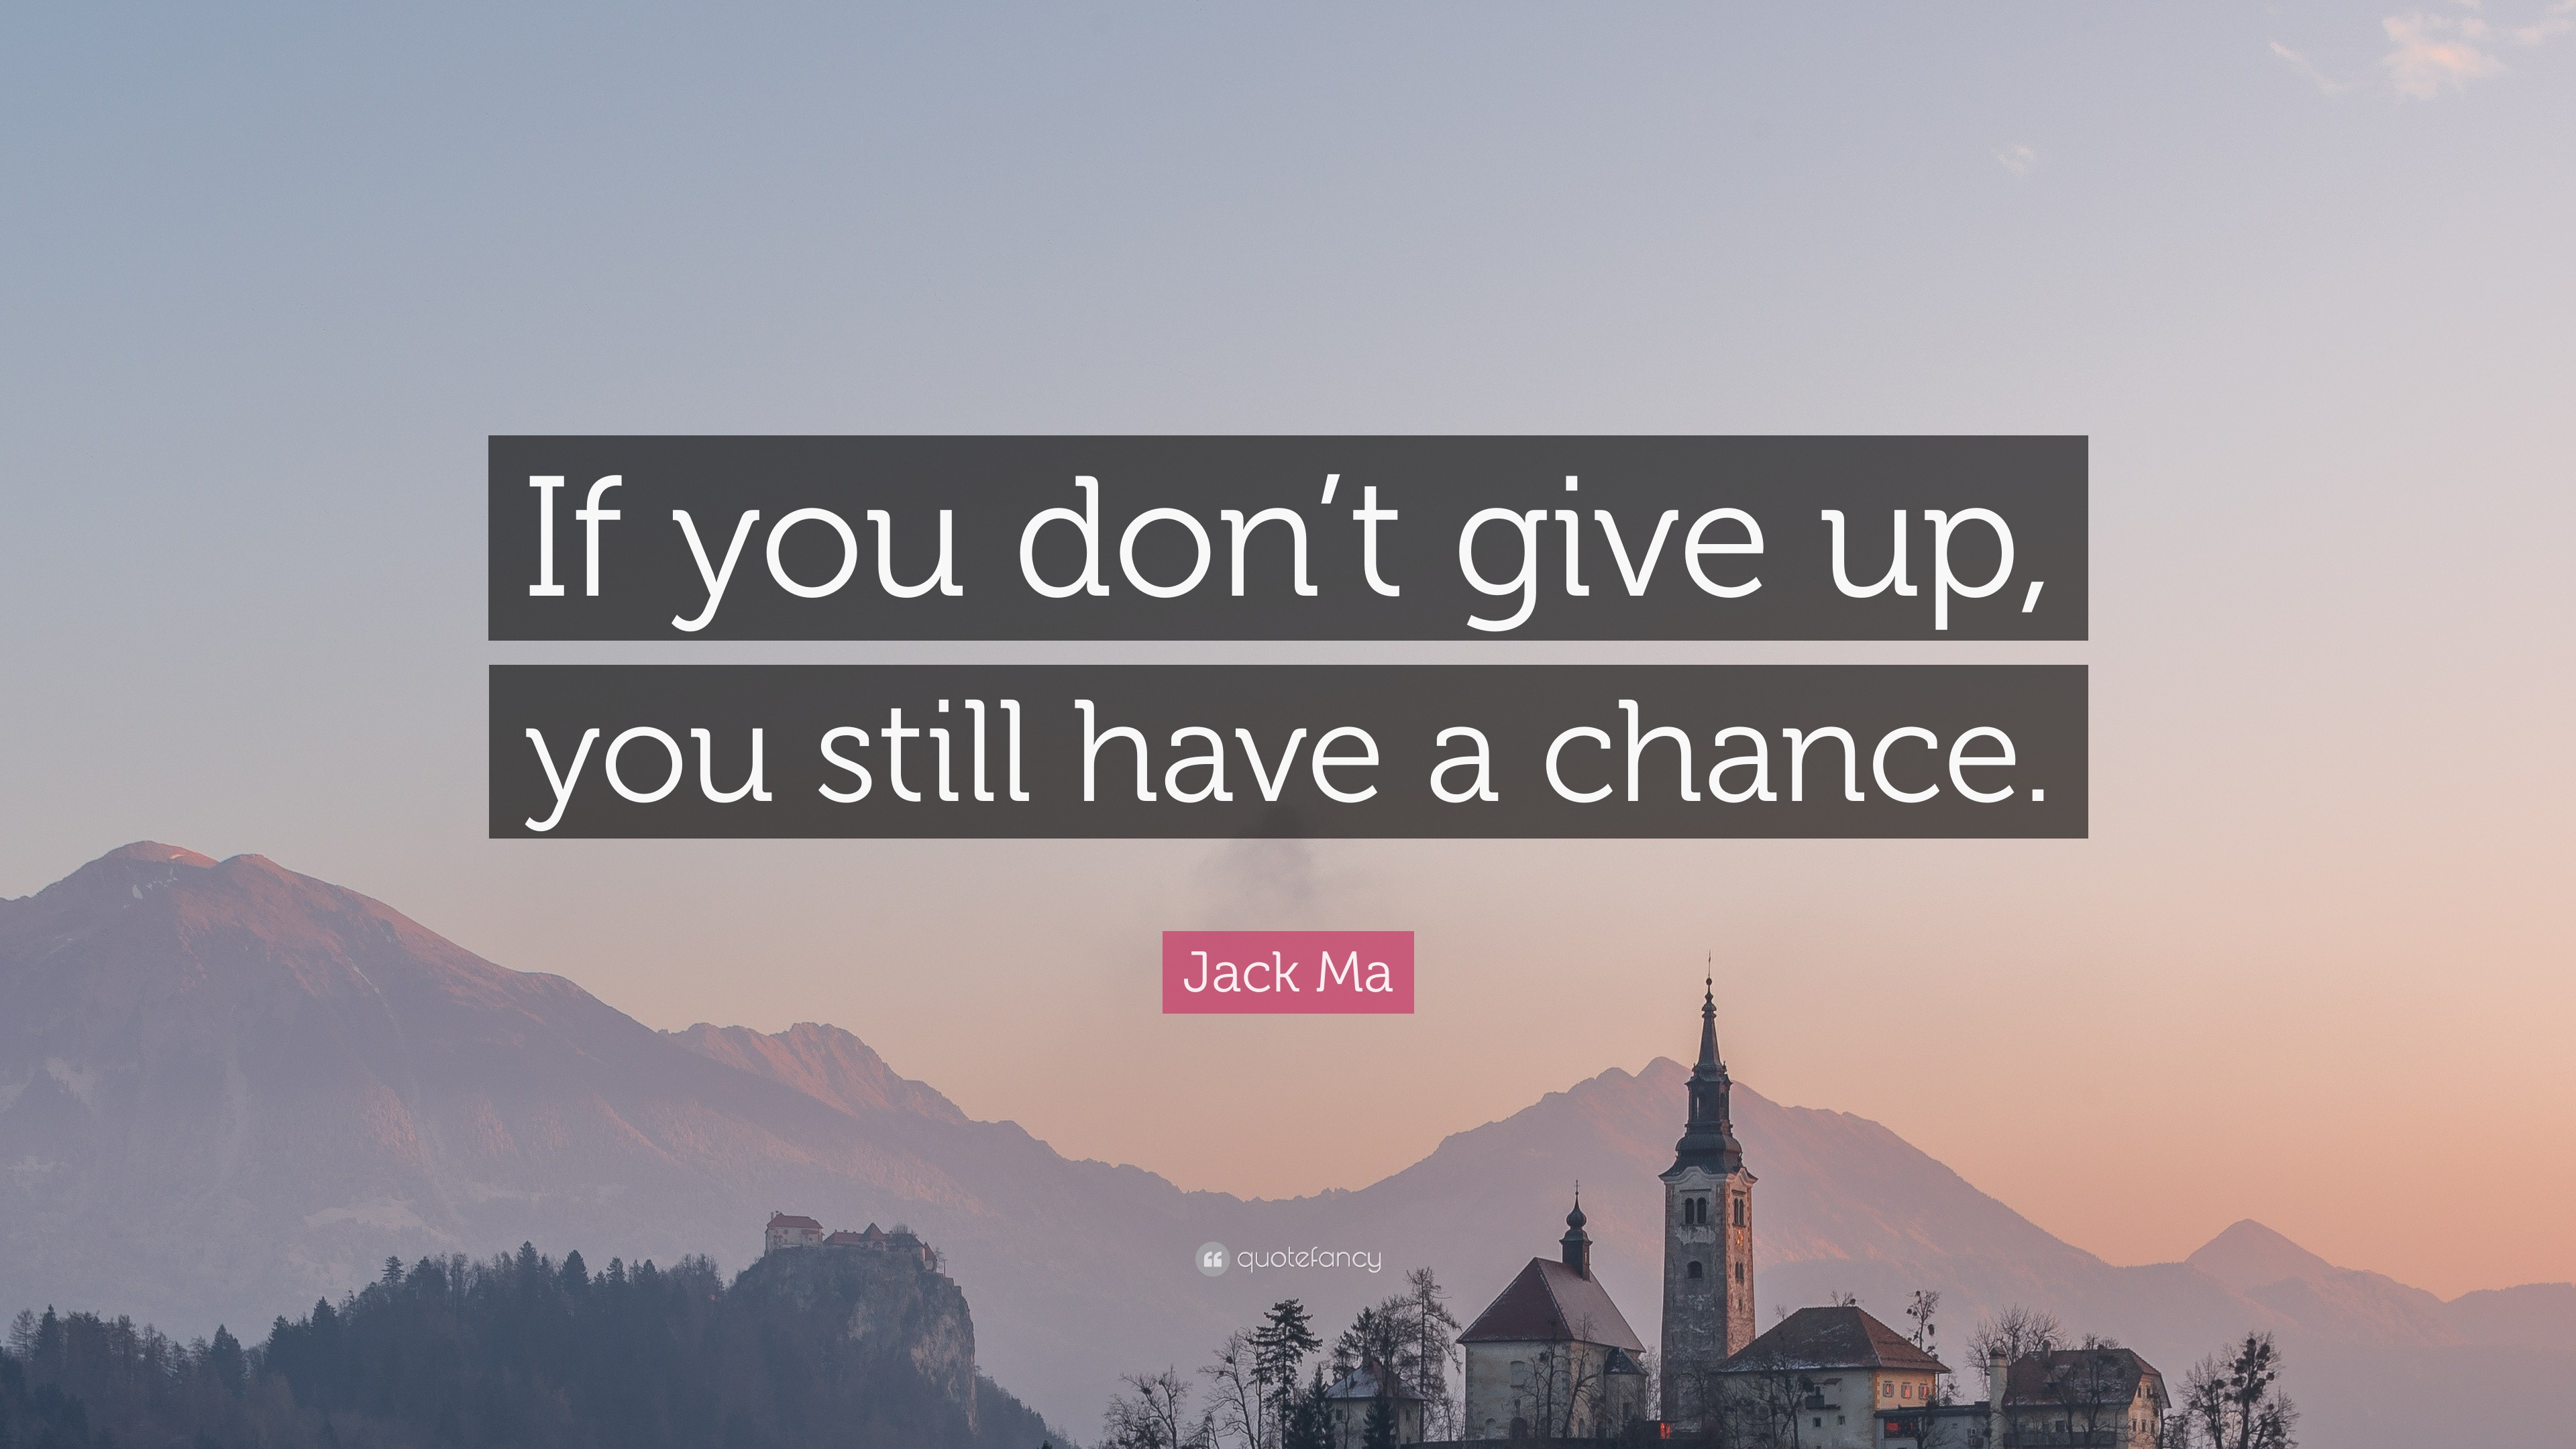 Jack Ma Quote: “If you don’t give up, you still have a chance.”